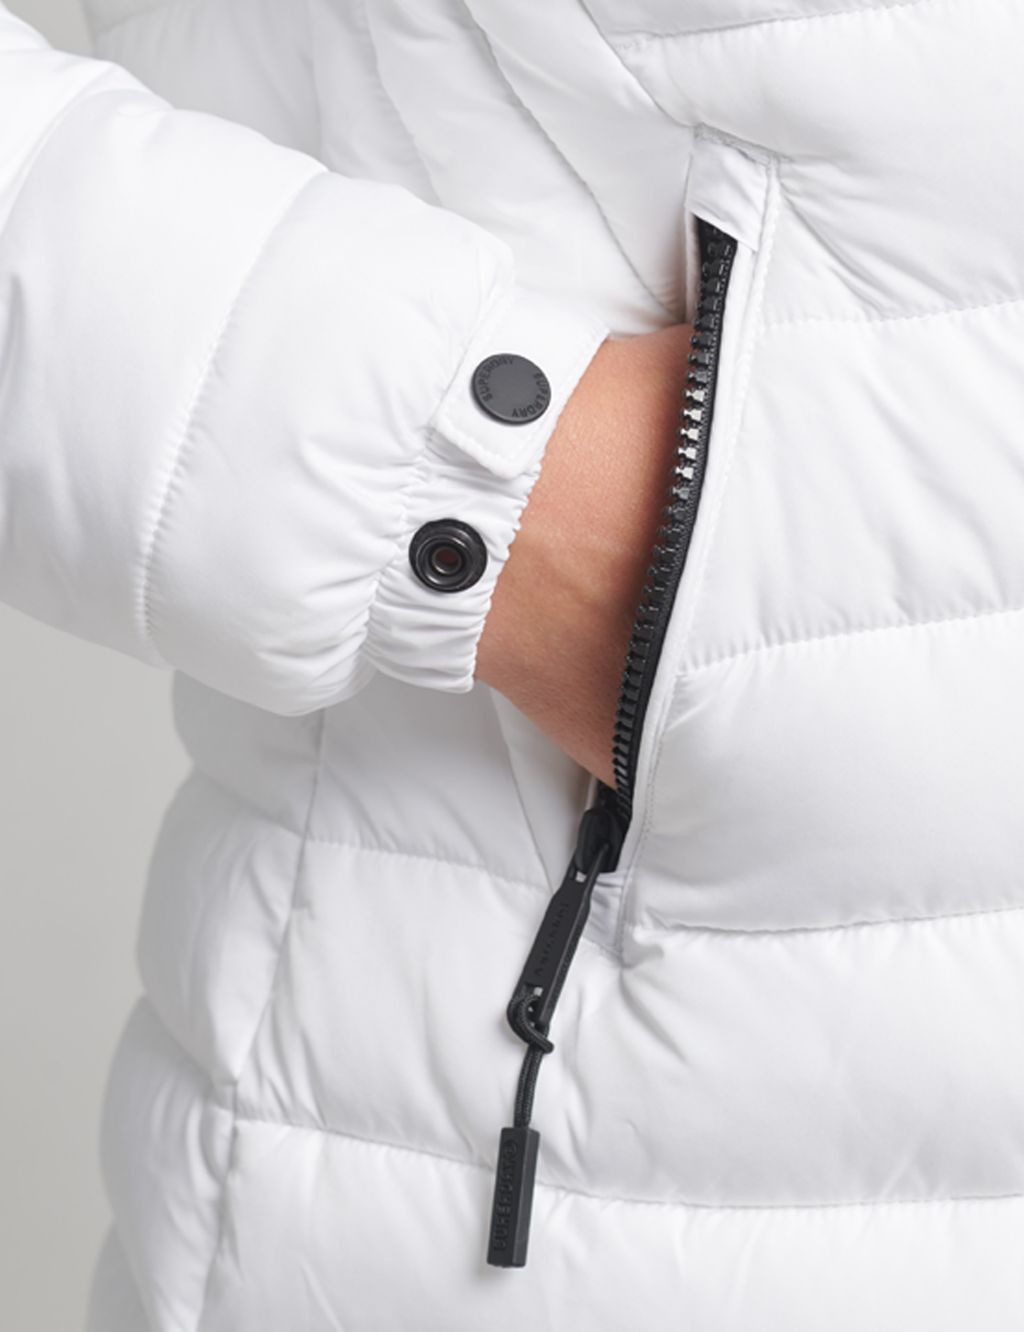 Quilted Hooded Puffer Jacket image 3